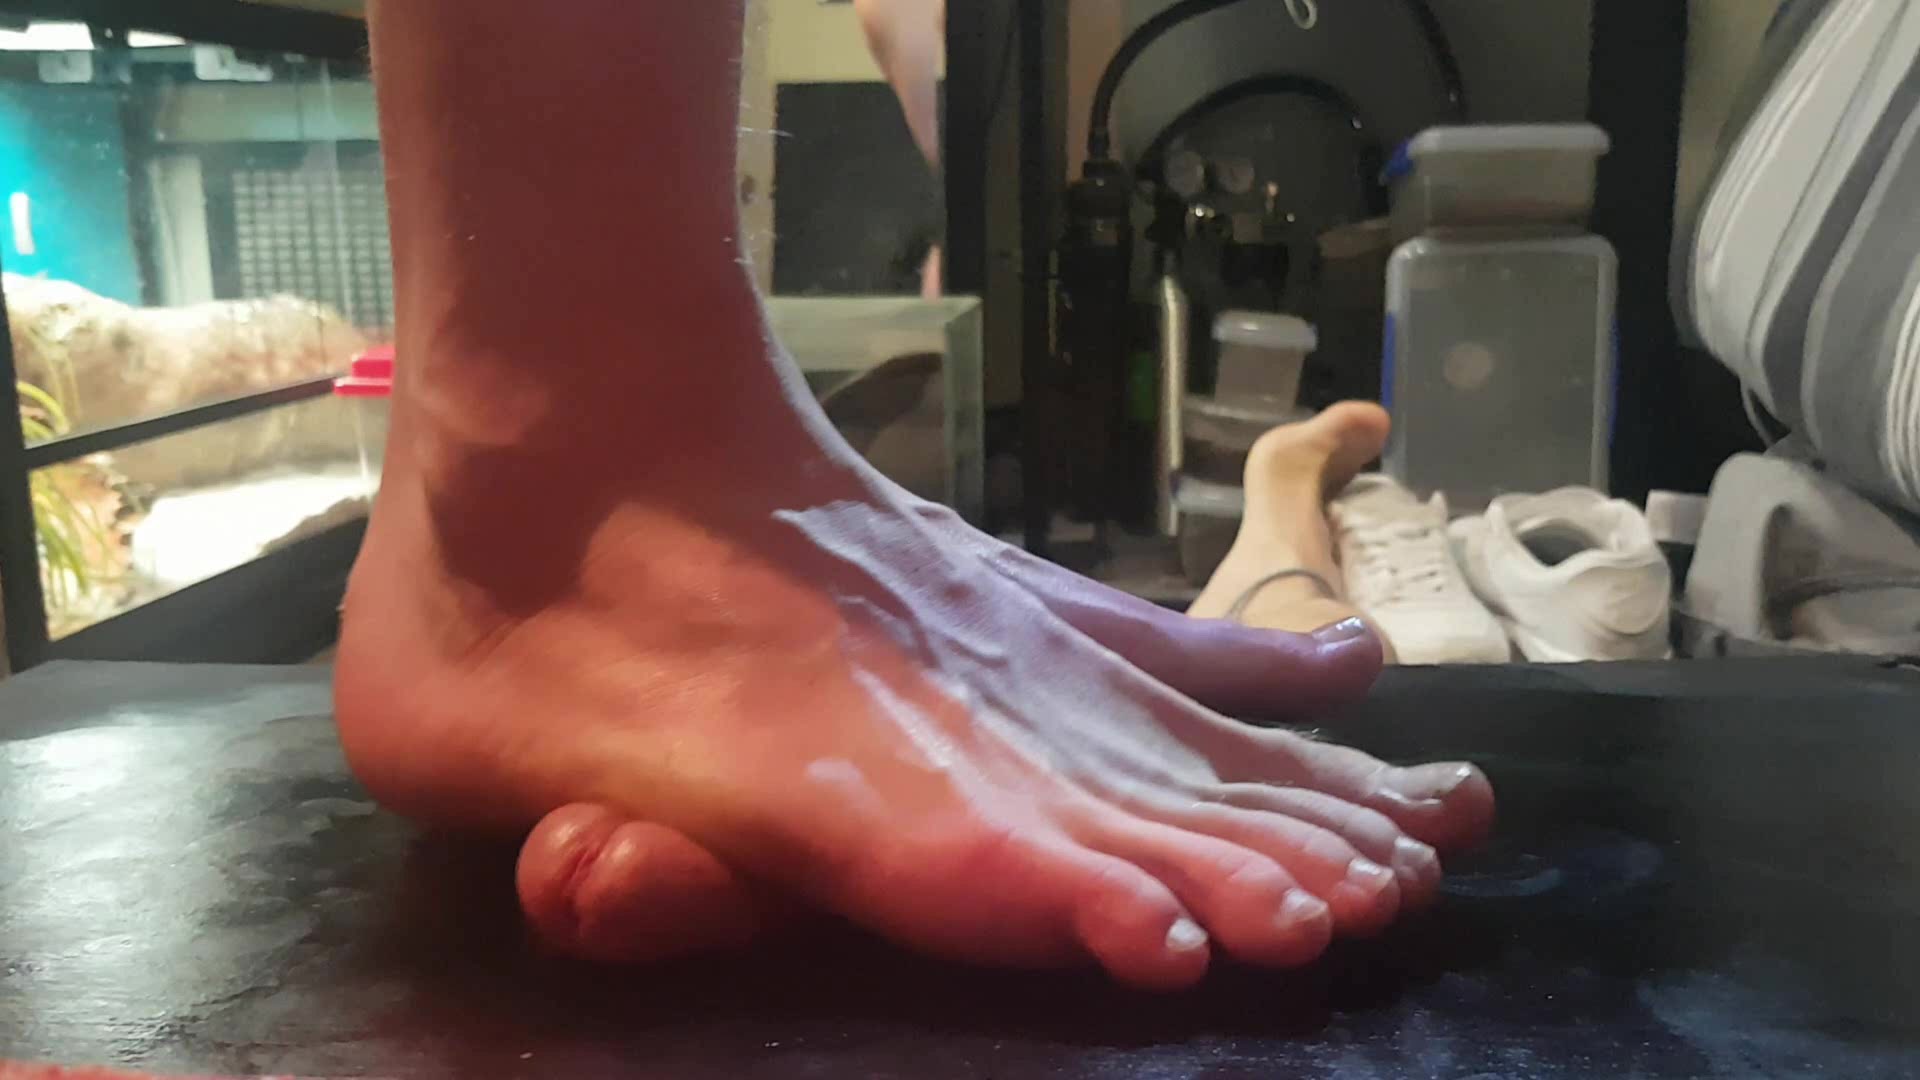 Feet fetish: teen boy tramples cum out of cockâ€¦ ThisVid.com